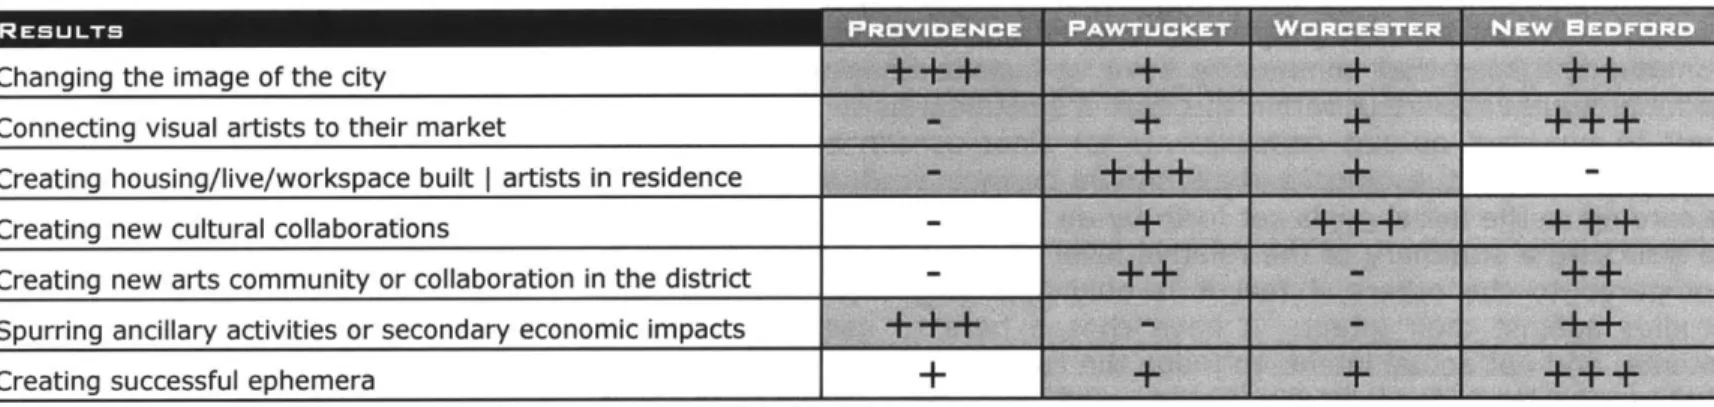 TABLE  5.7.1  RATING  OF  SUCCESS  OF  CASE  STUDY  DISTRICTS  BASED  ON  INITIAL  INTENT